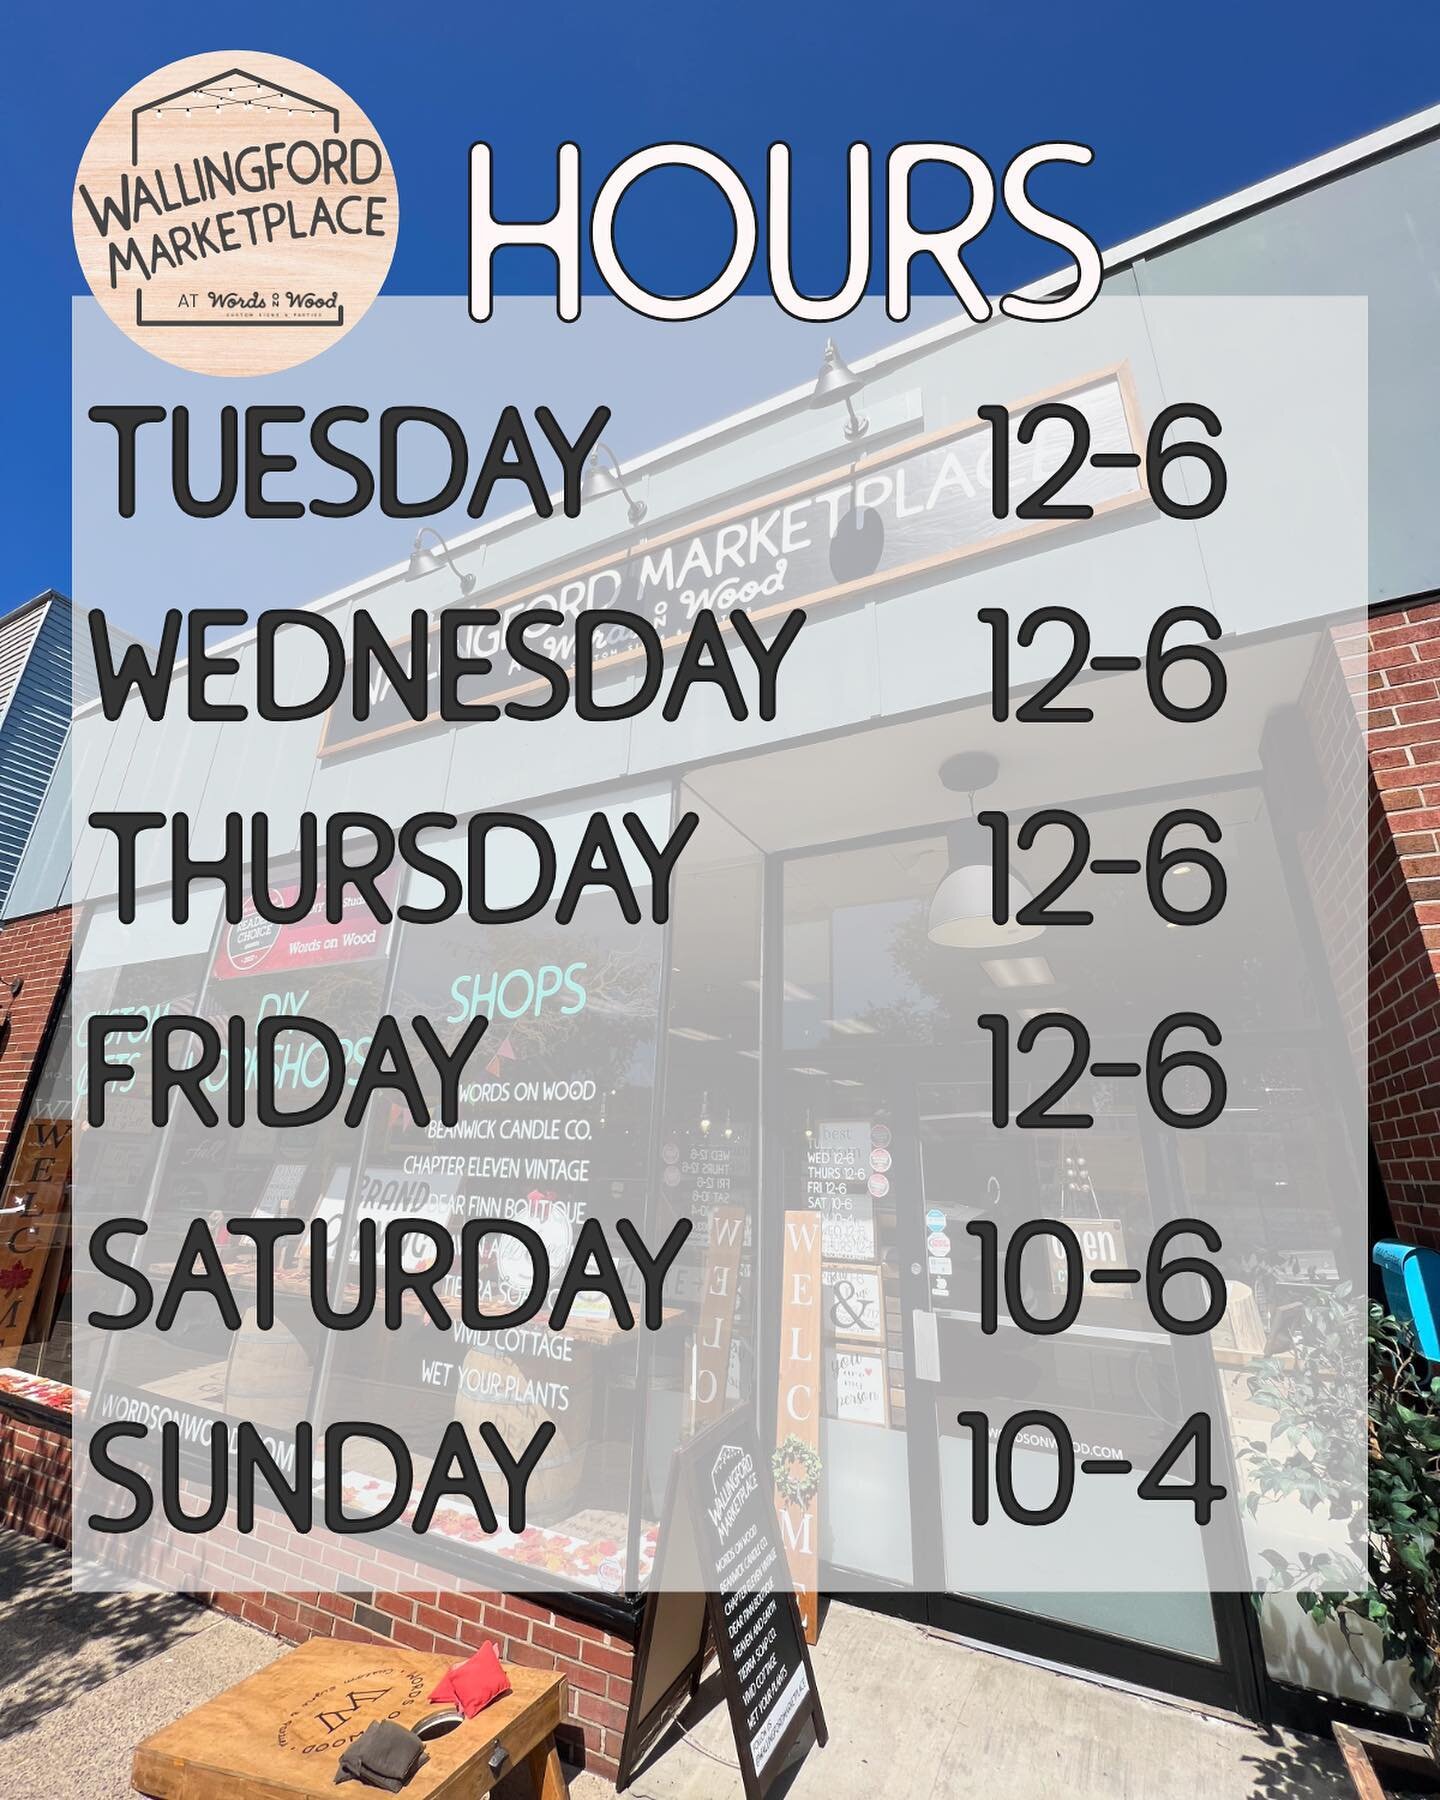 The Wallingford Marketplace is open 6 days a week! We will also be open during Words on Wood workshops and parties 🎉 

Hours:
Tuesday-Friday 12-6
Saturday 10-6
Sunday 10-4